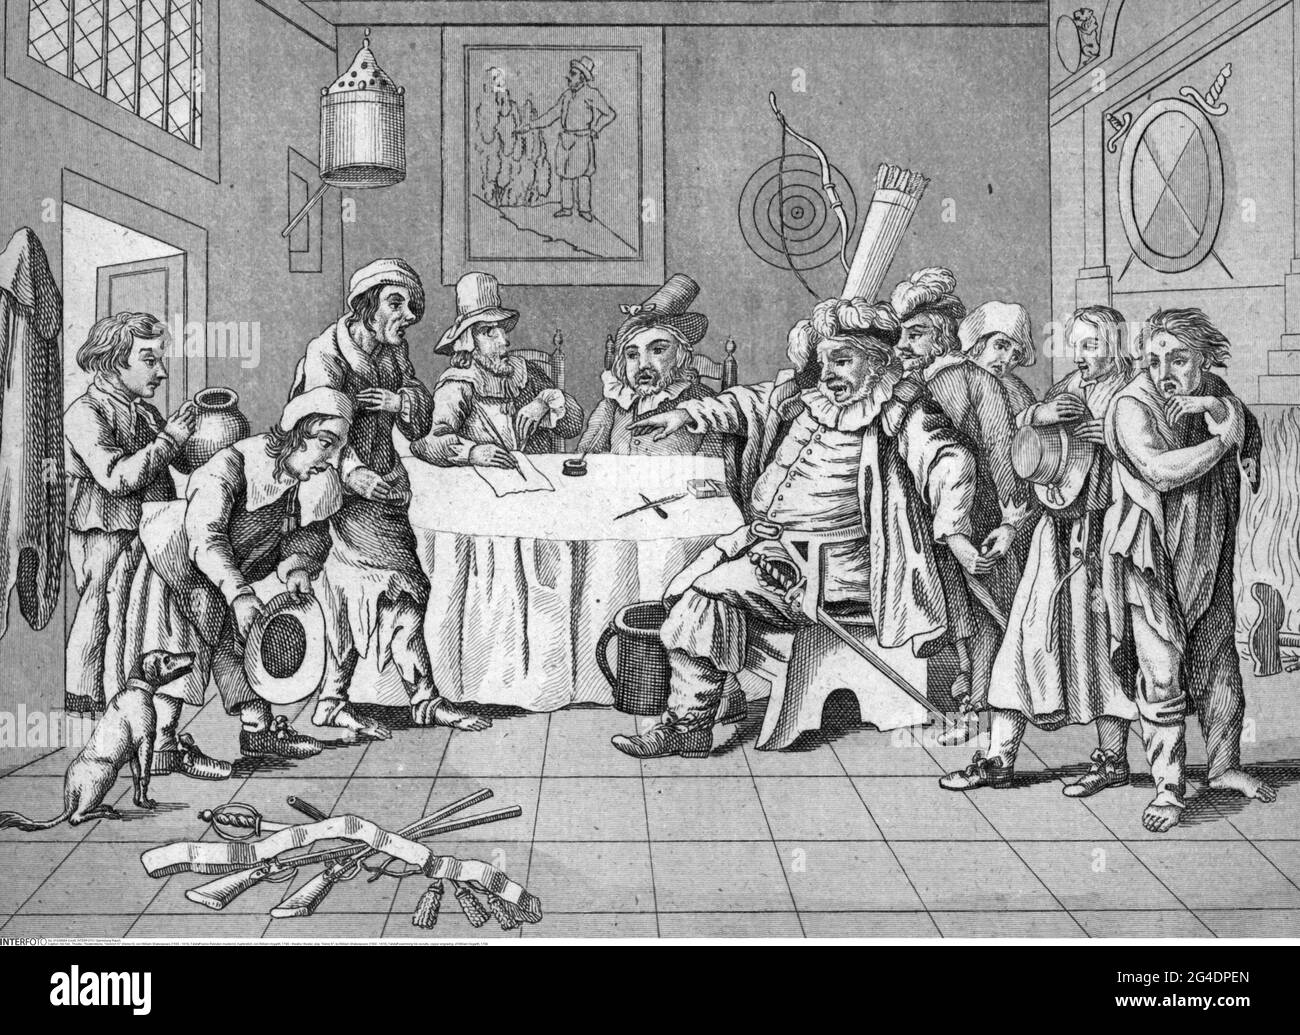 theatre / theater, play, 'Henry IV', by William Shakespeare (1564 - 1616), Falstaff examining his recruits, ARTIST'S COPYRIGHT HAS NOT TO BE CLEARED Stock Photo